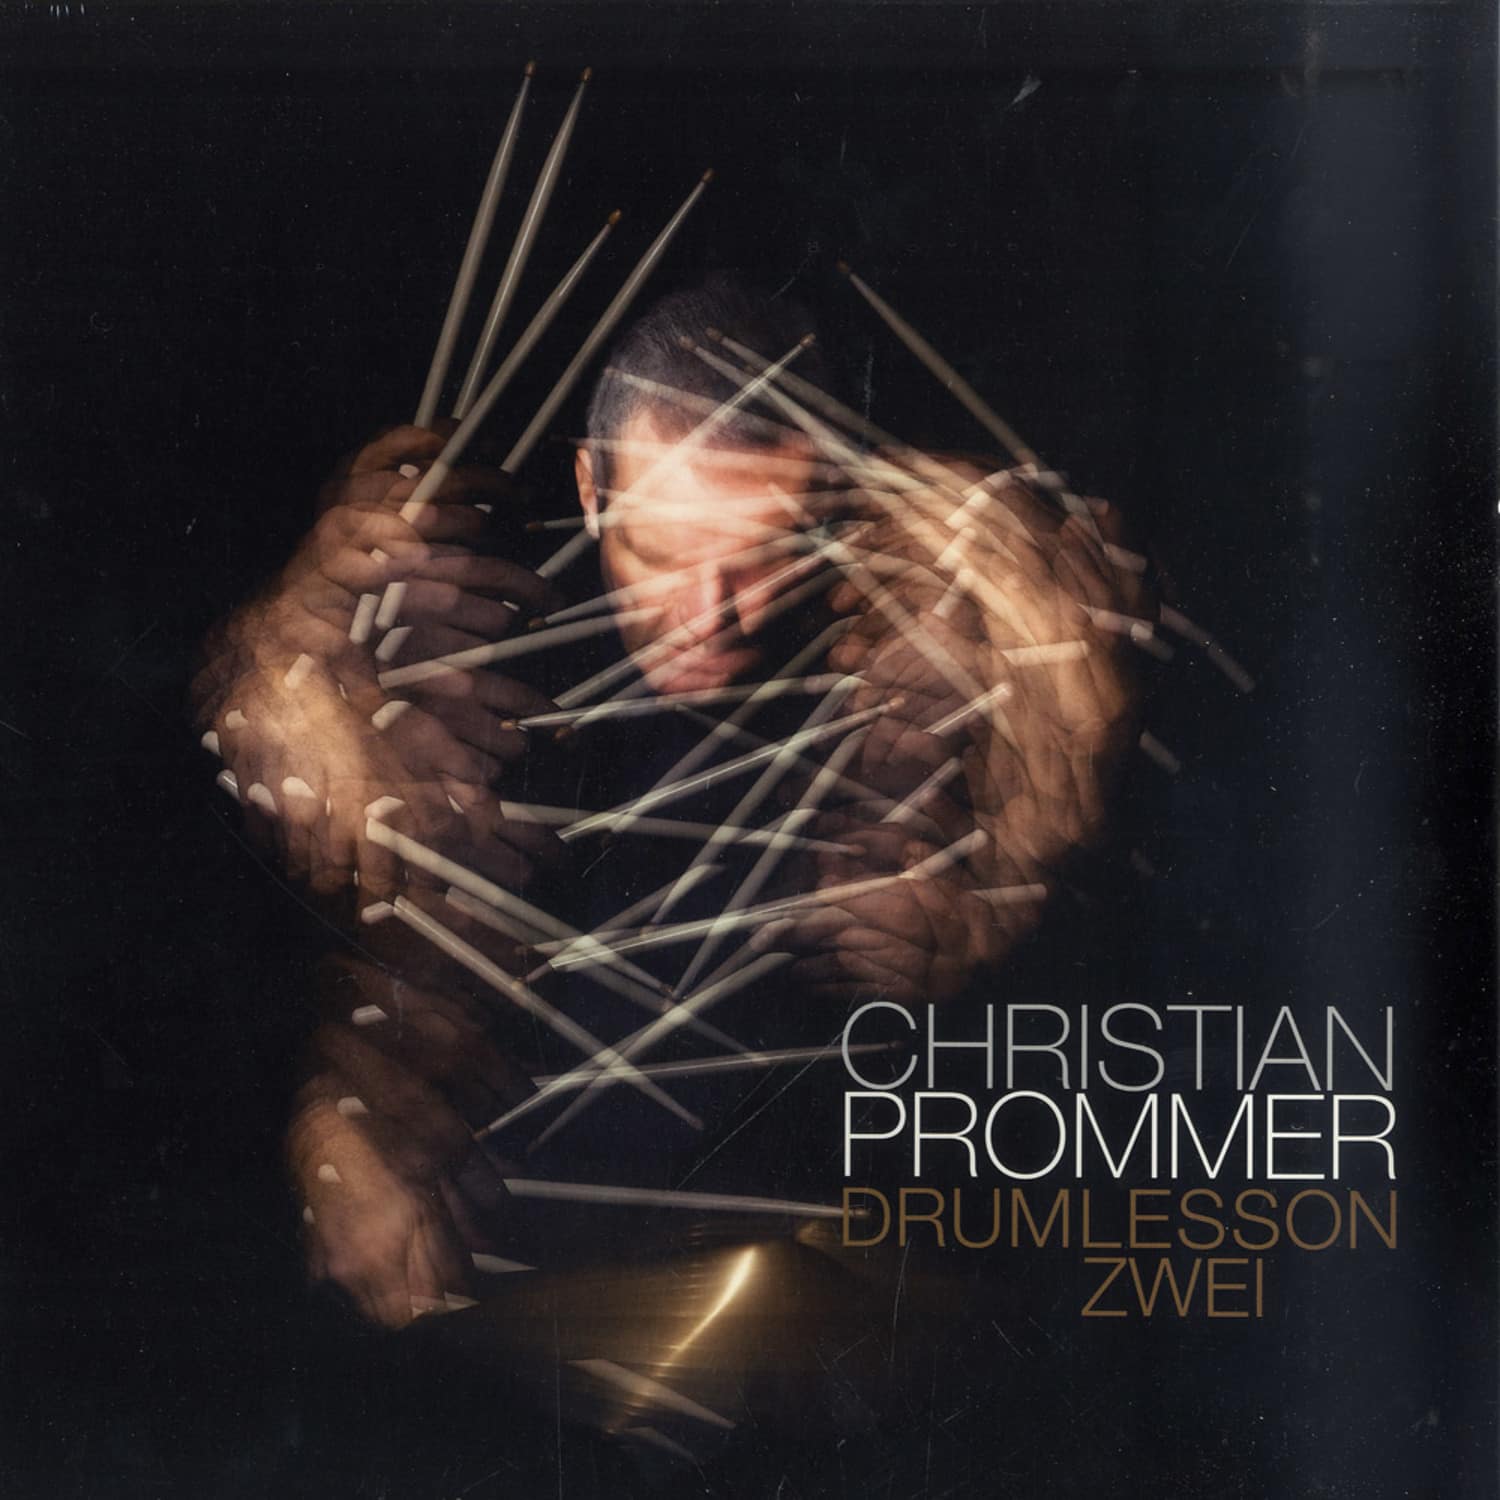 Christian Prommer - DRUMLESSION ZWEI 